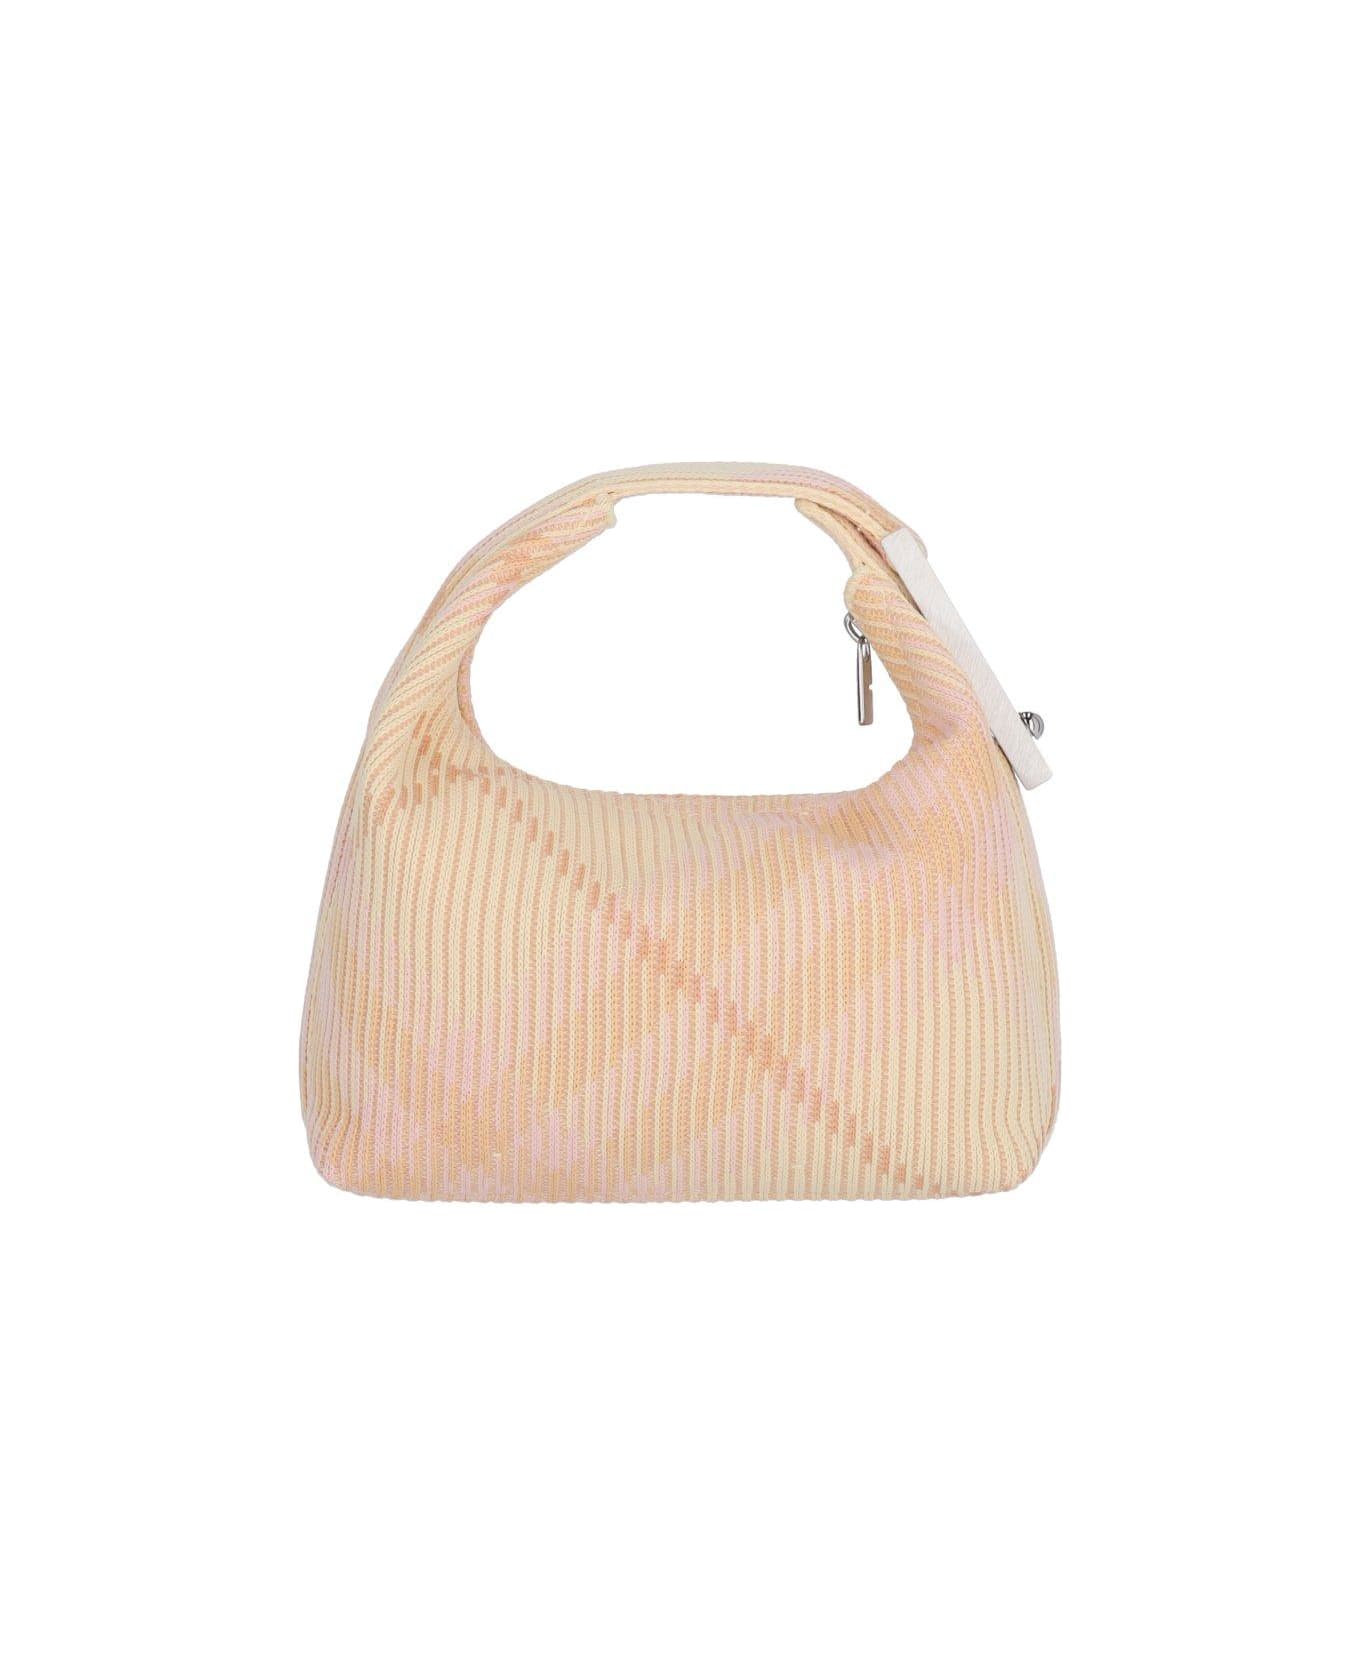 Burberry Check Pattern Zipped Tote Bag - Pink